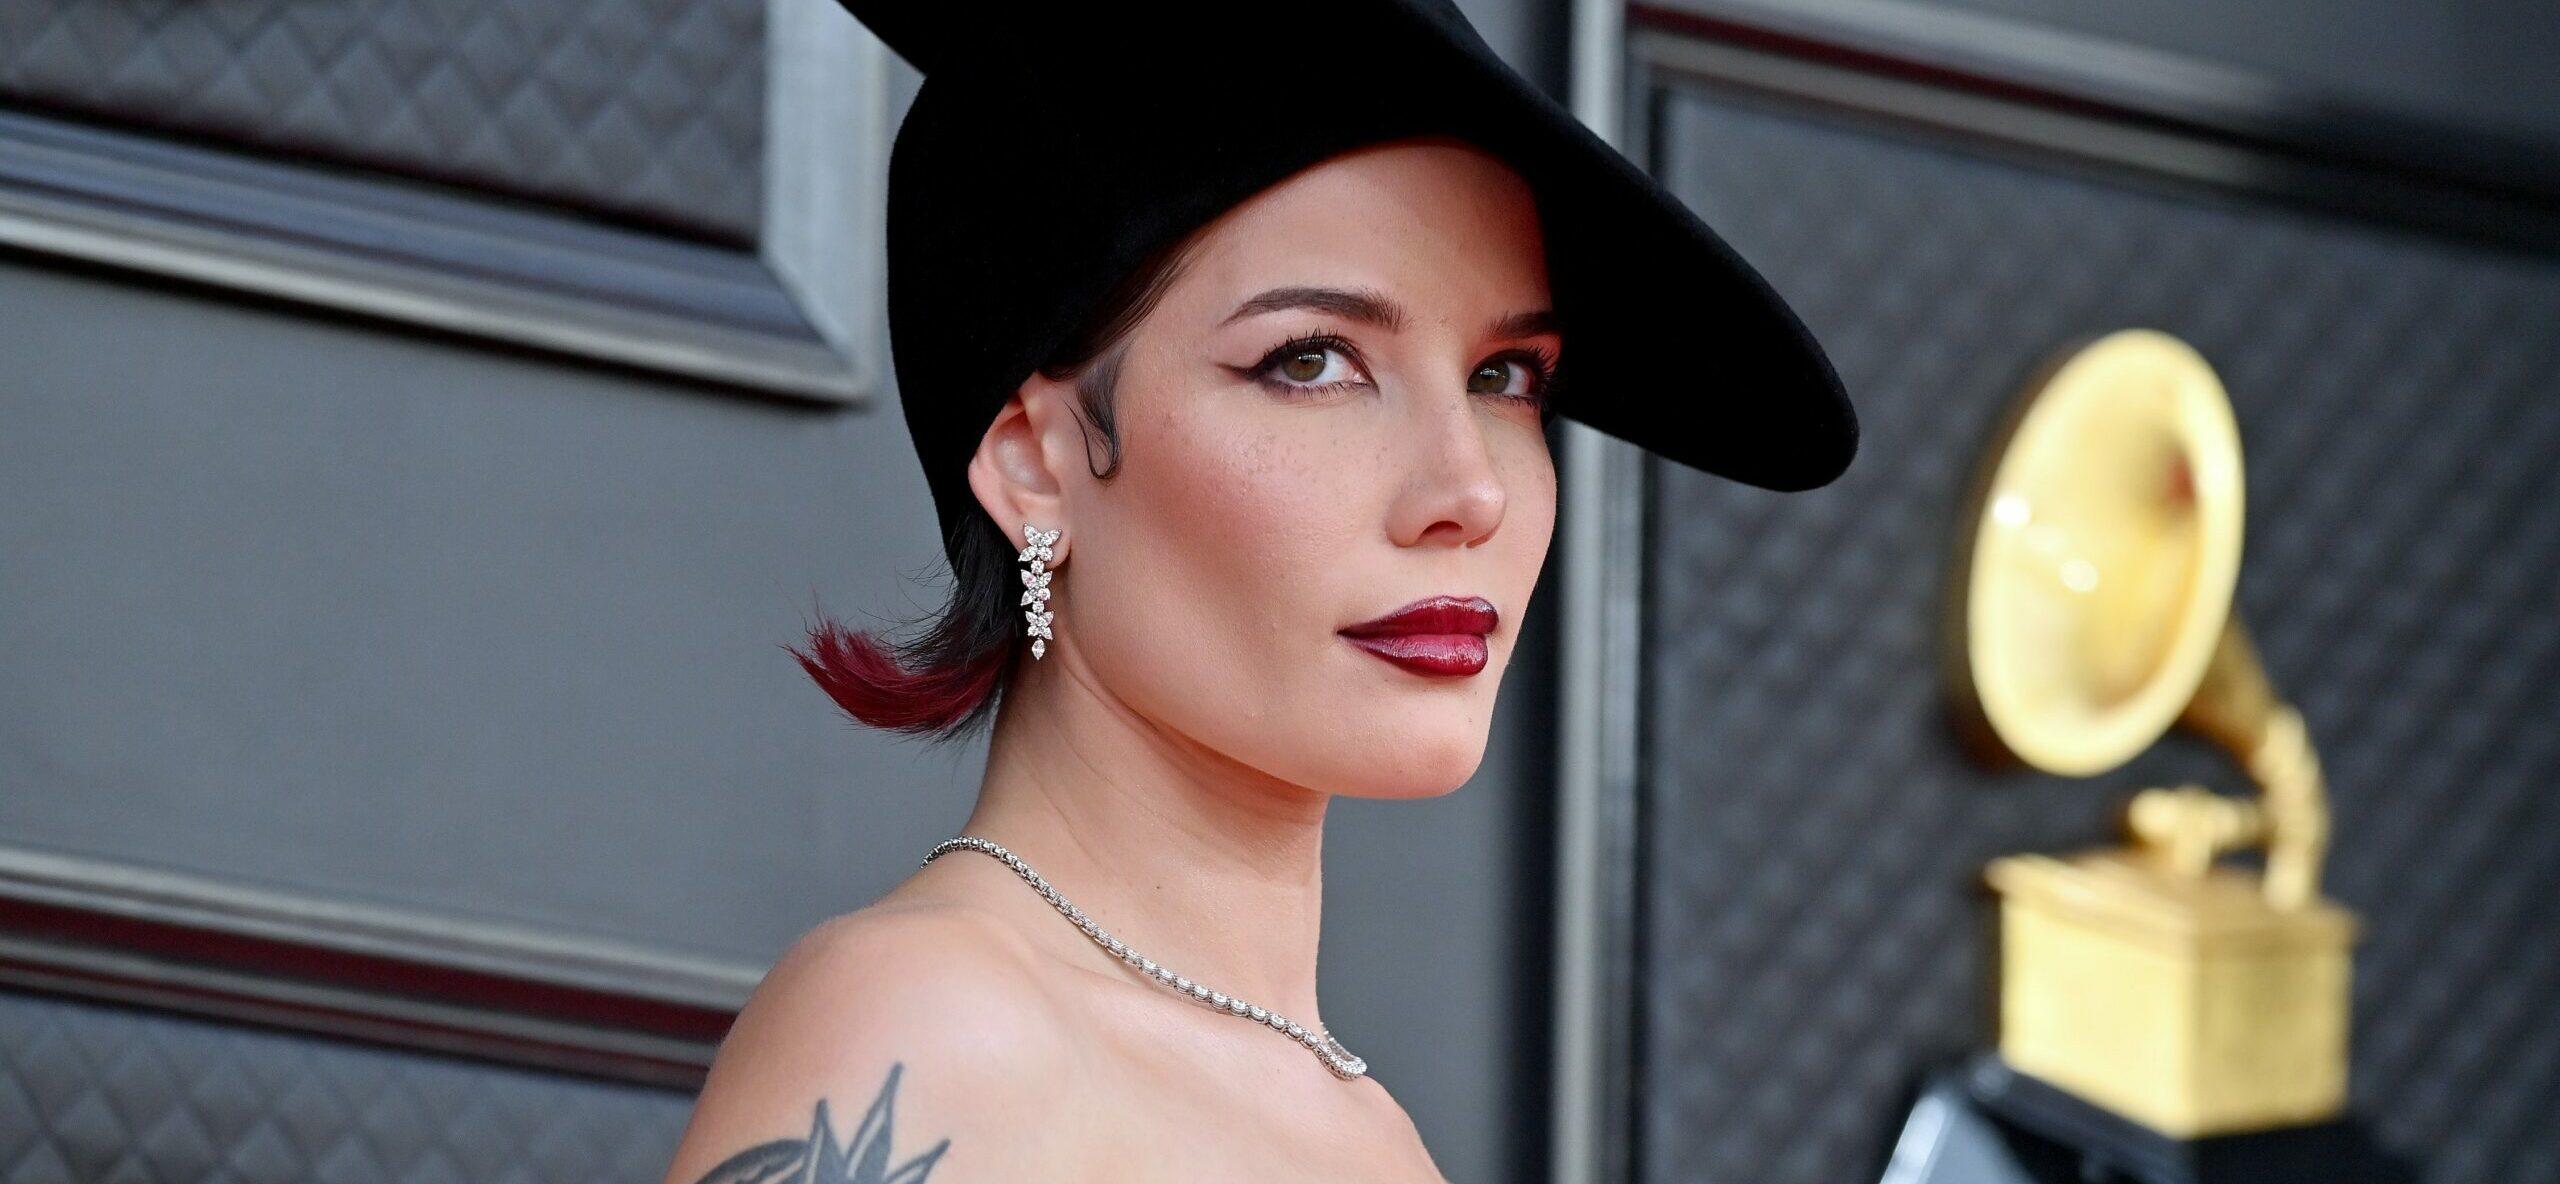 Halsey Sued By Nanny For ‘Discrimination’ After Allegedly Being ‘Illegally’ Fired